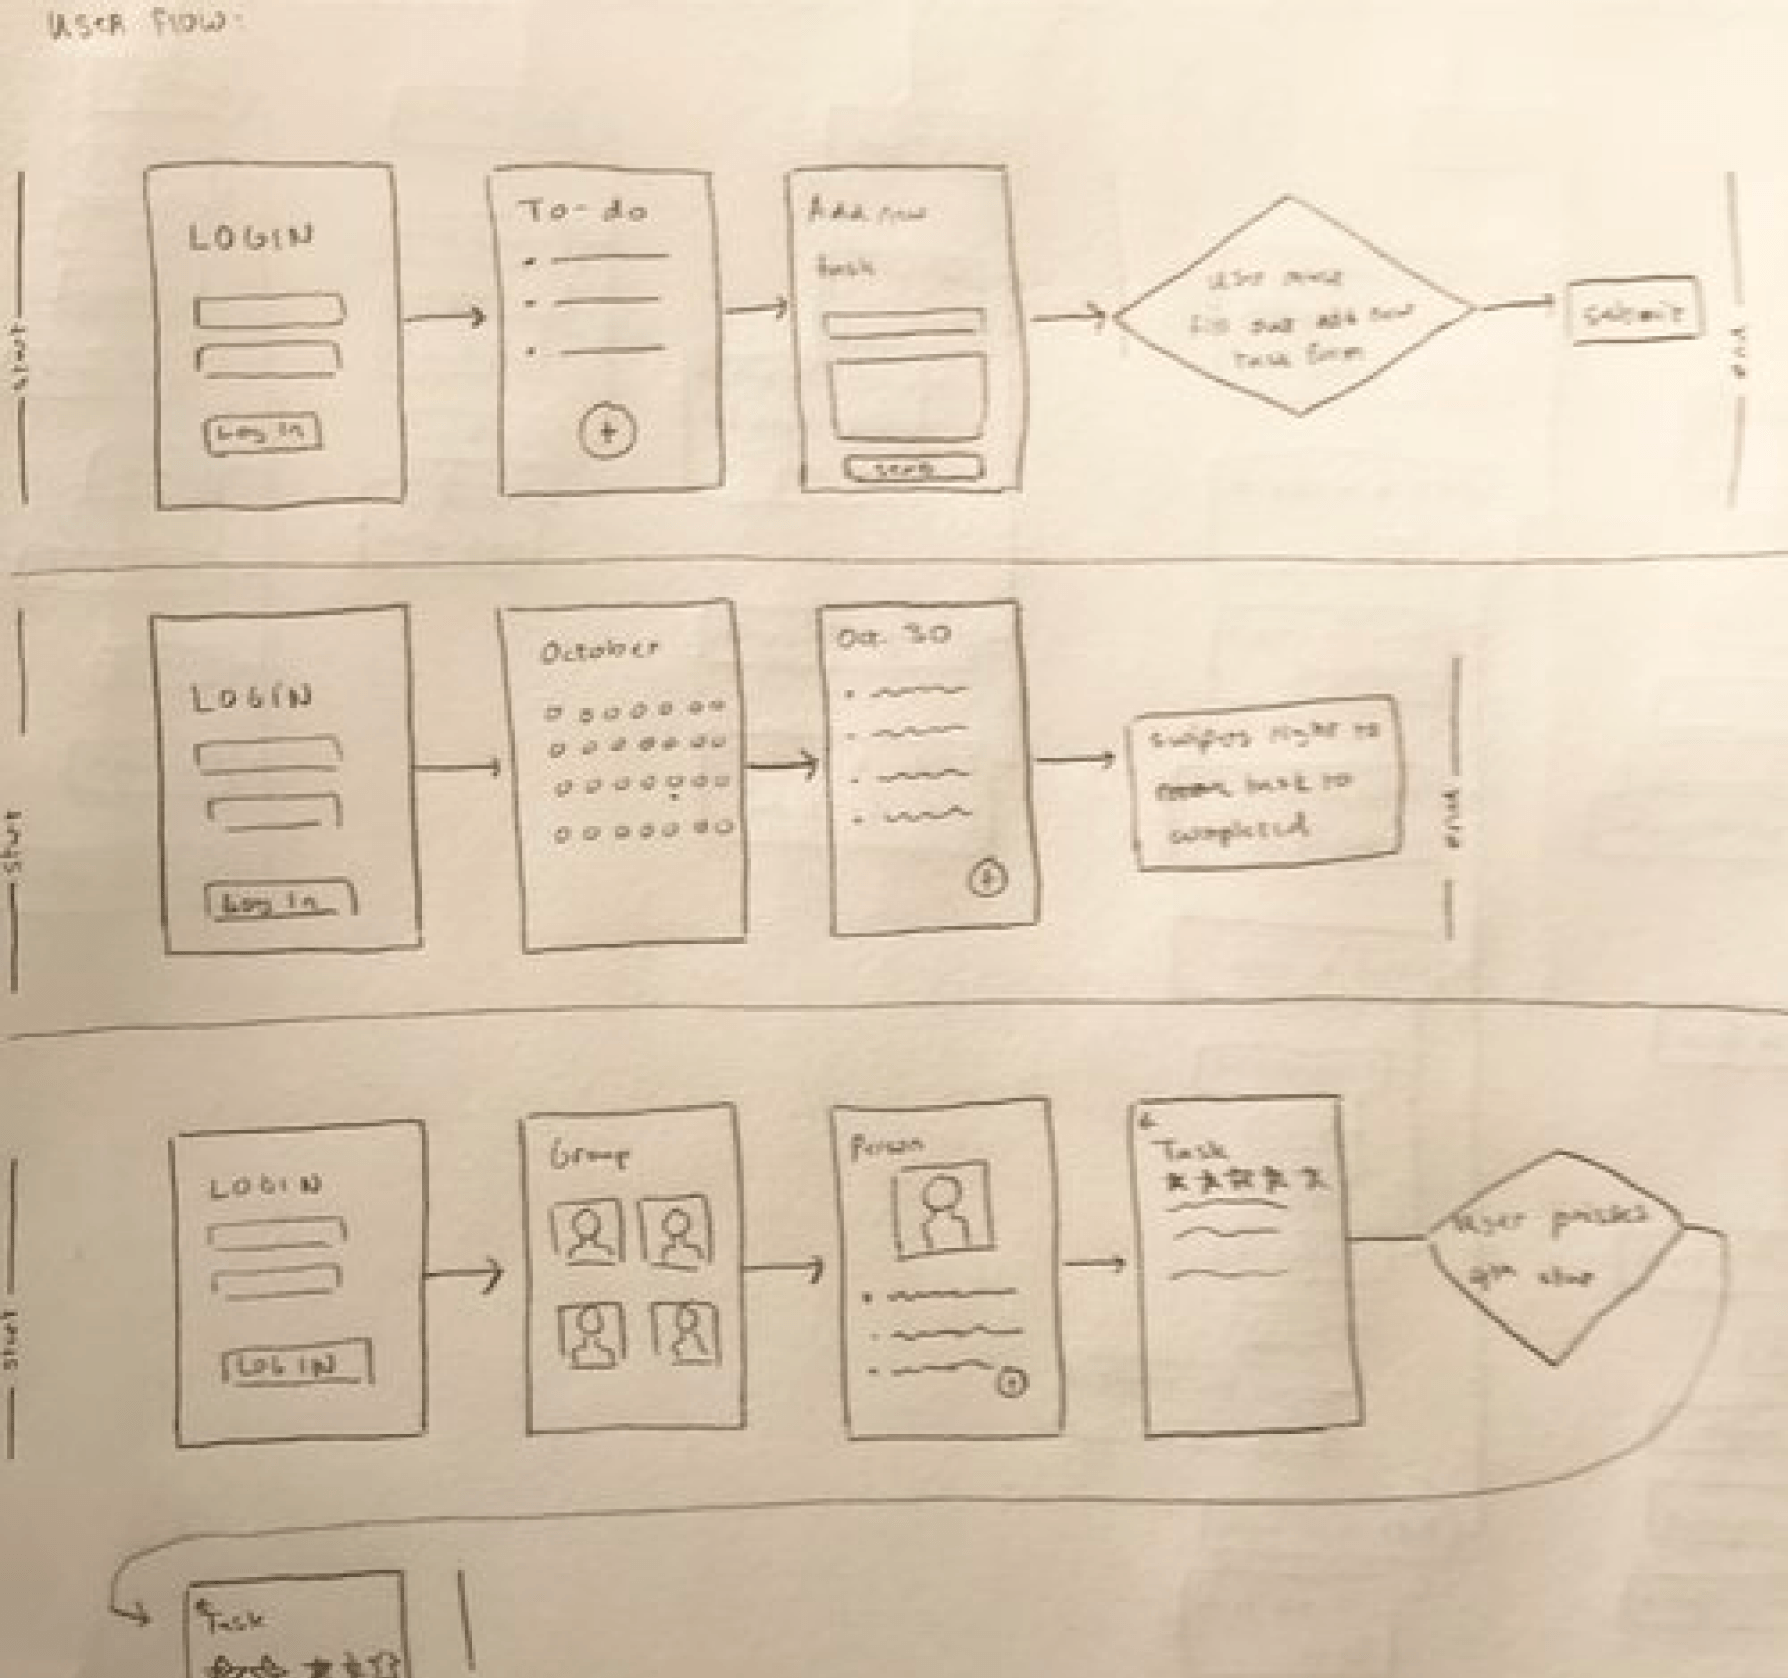 User Flow sketches for the Chor application.